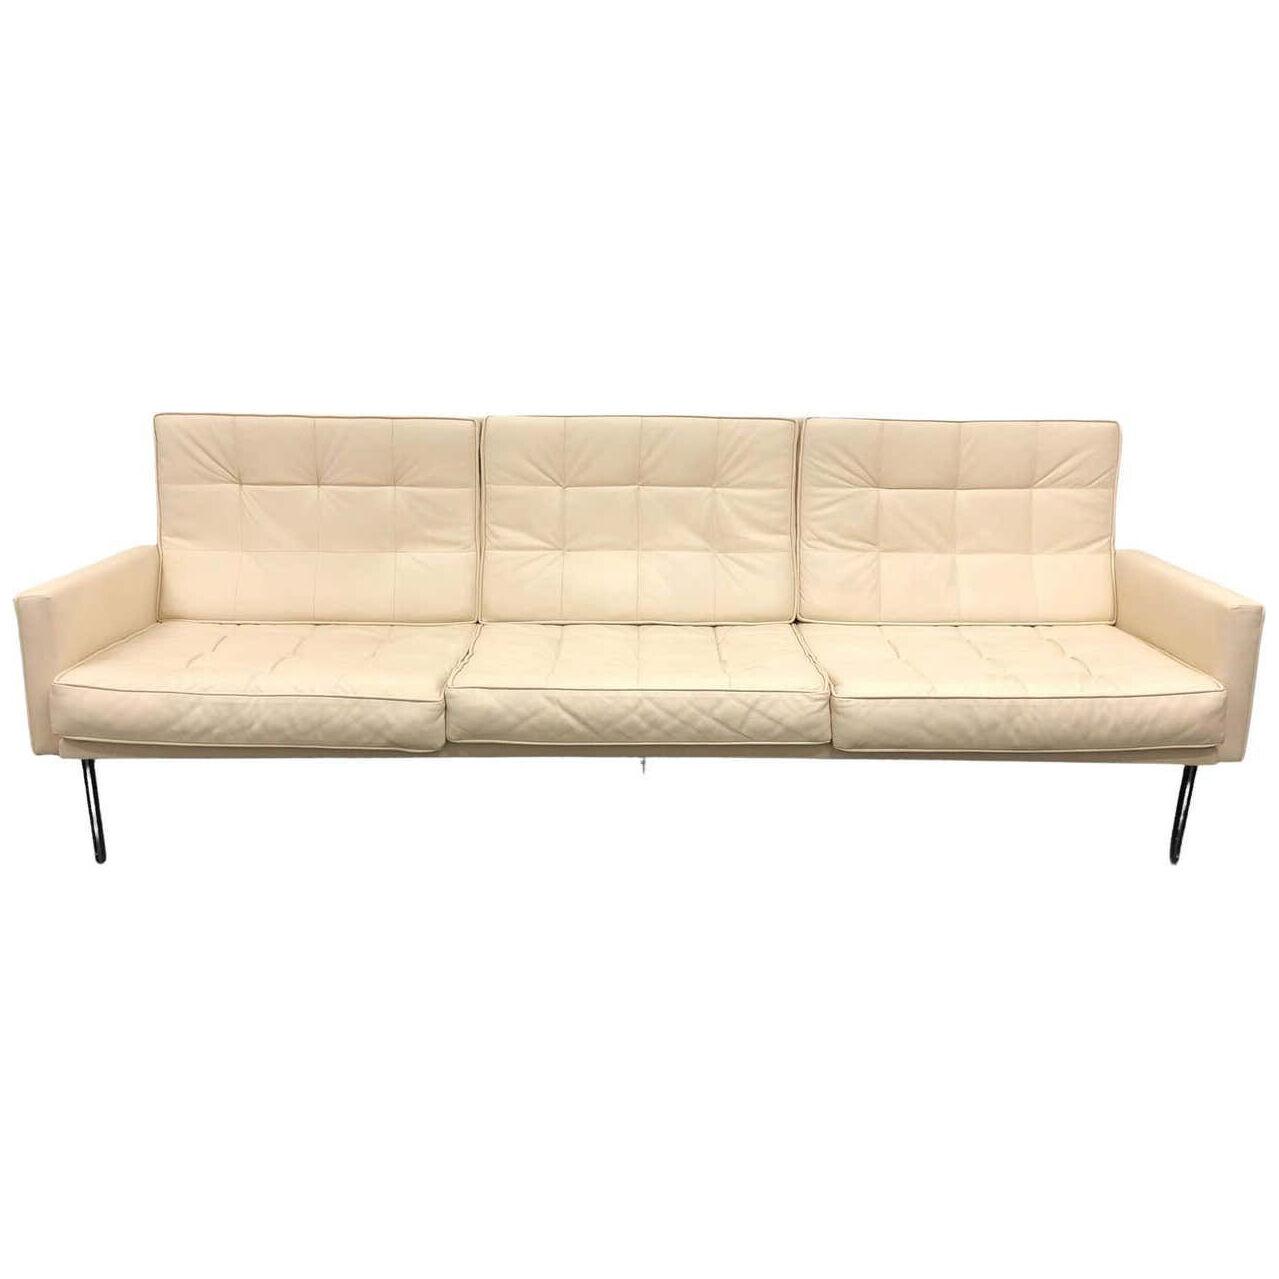 Off White Leather and Stainless Steel Parallel Bar Sofa by Florence Knoll